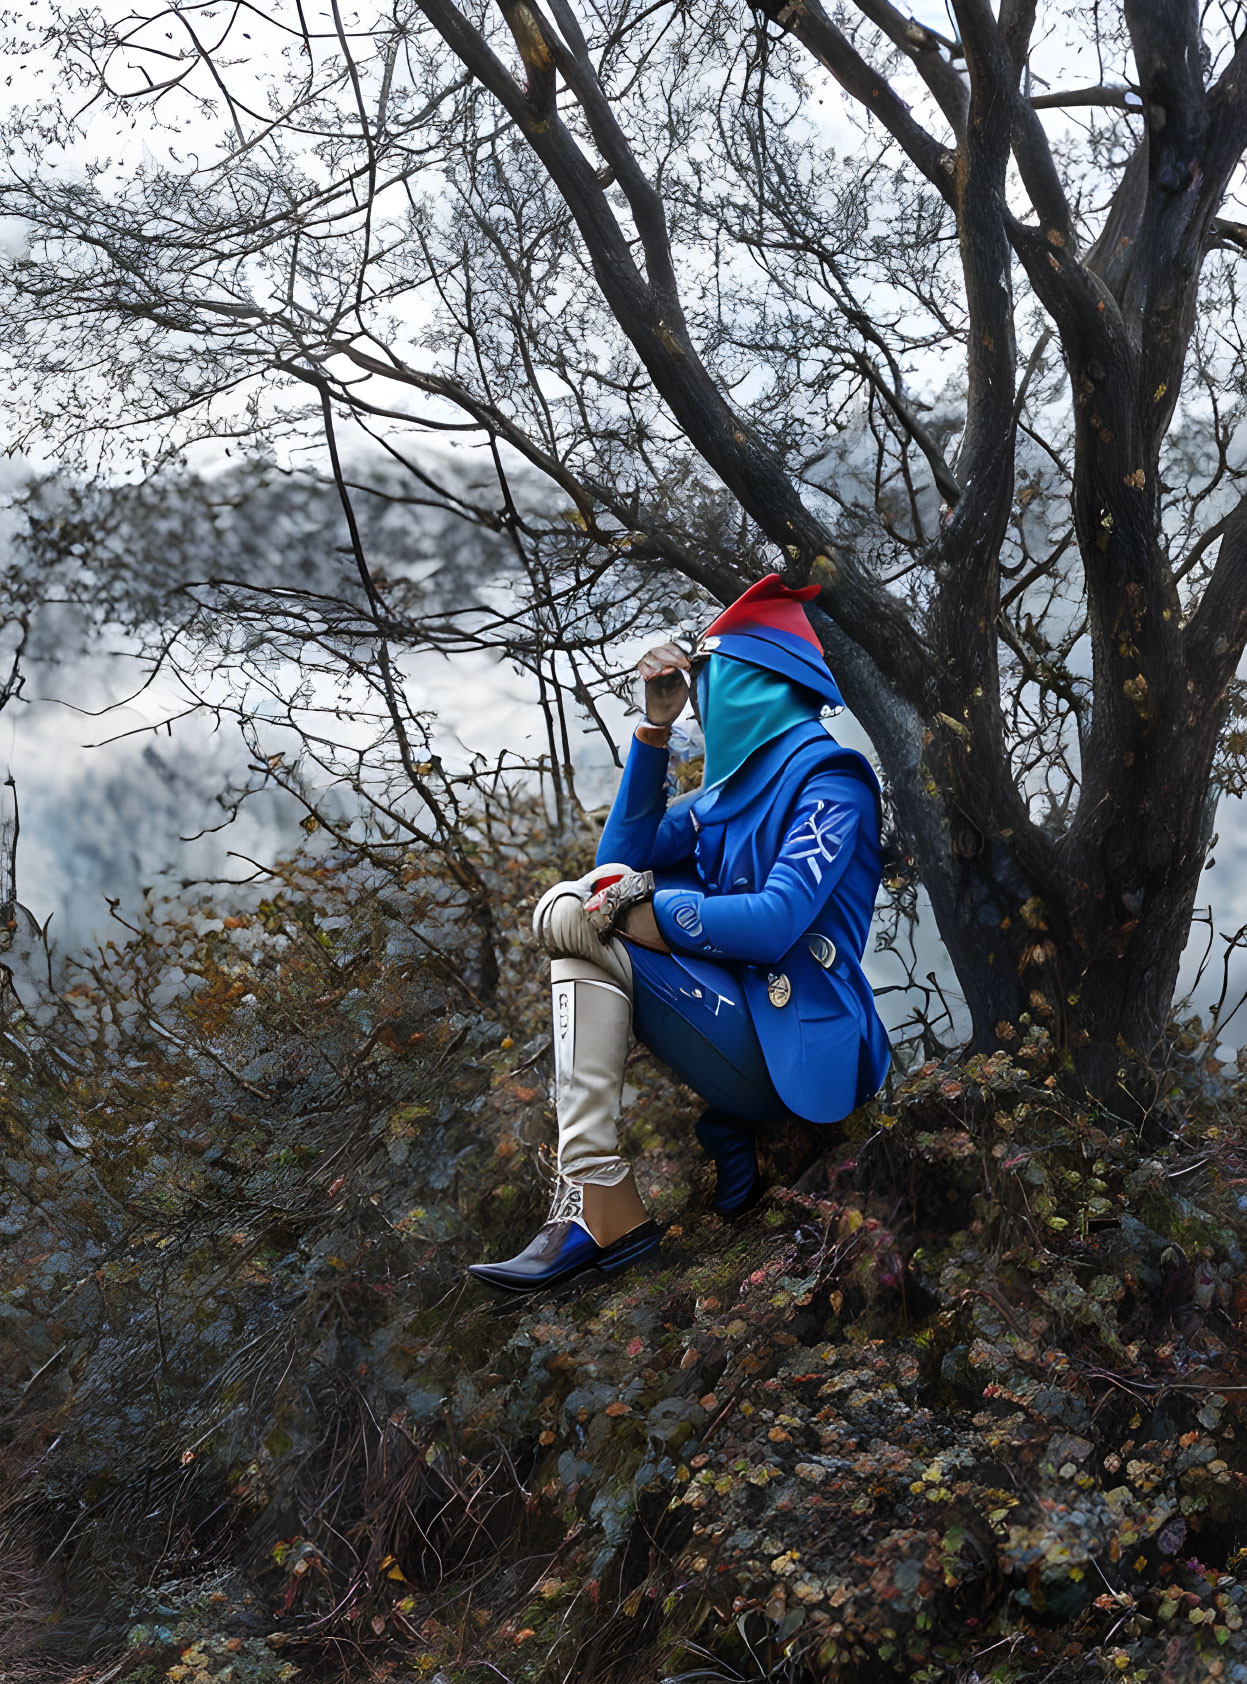 Person in Blue Suit and Red Beanie Drinking on Tree Branch in Misty Wooded Landscape